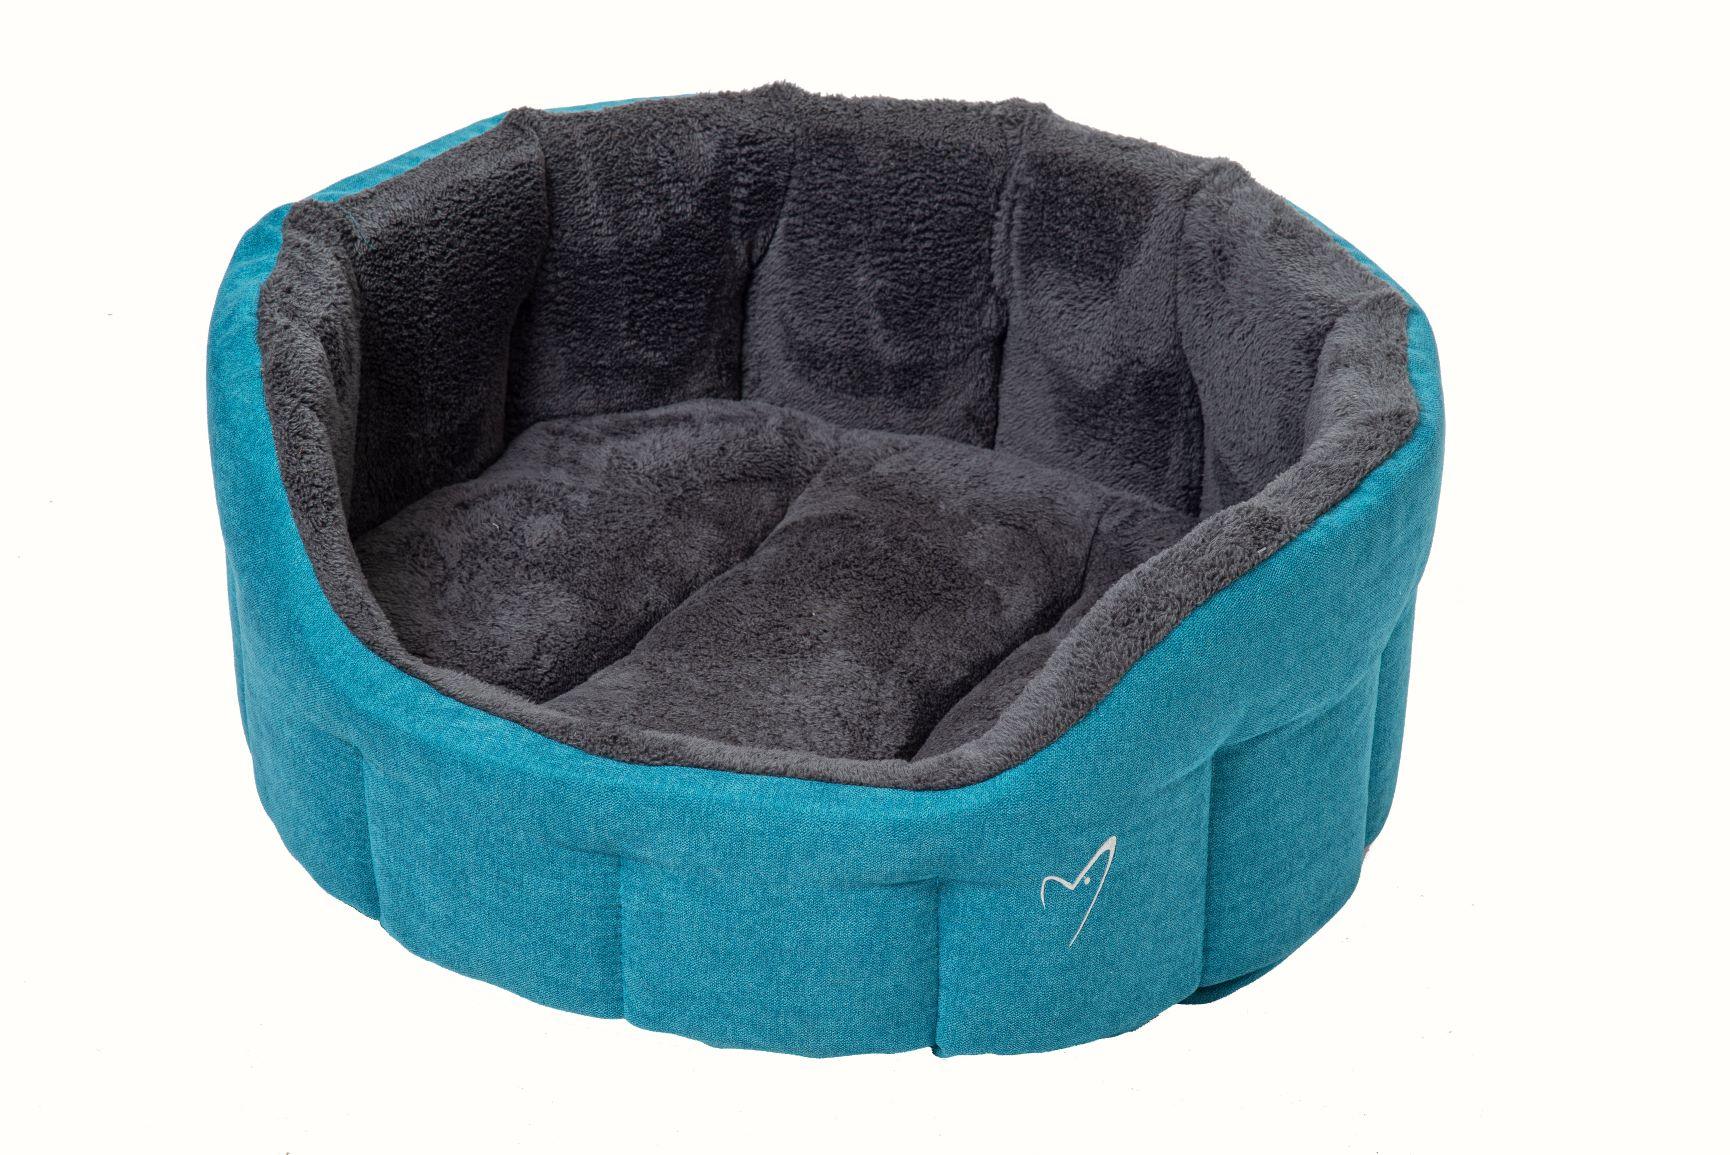 View Camden Deluxe Bed Teal Large 76cm 30 information